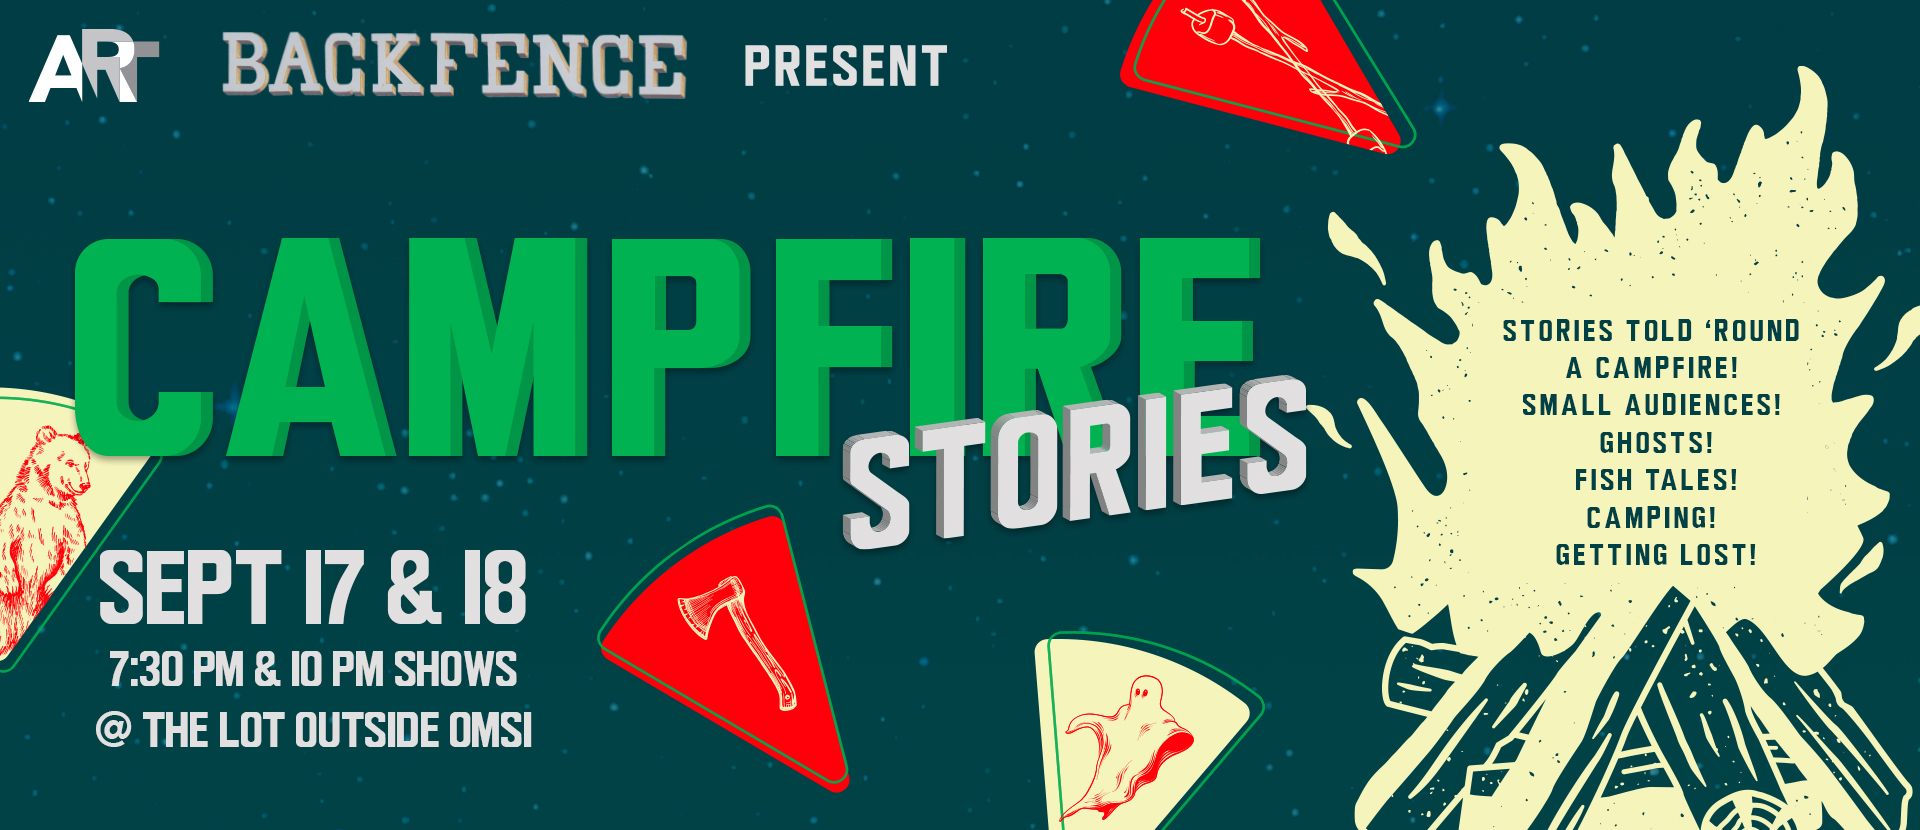 Campfire Stories Img